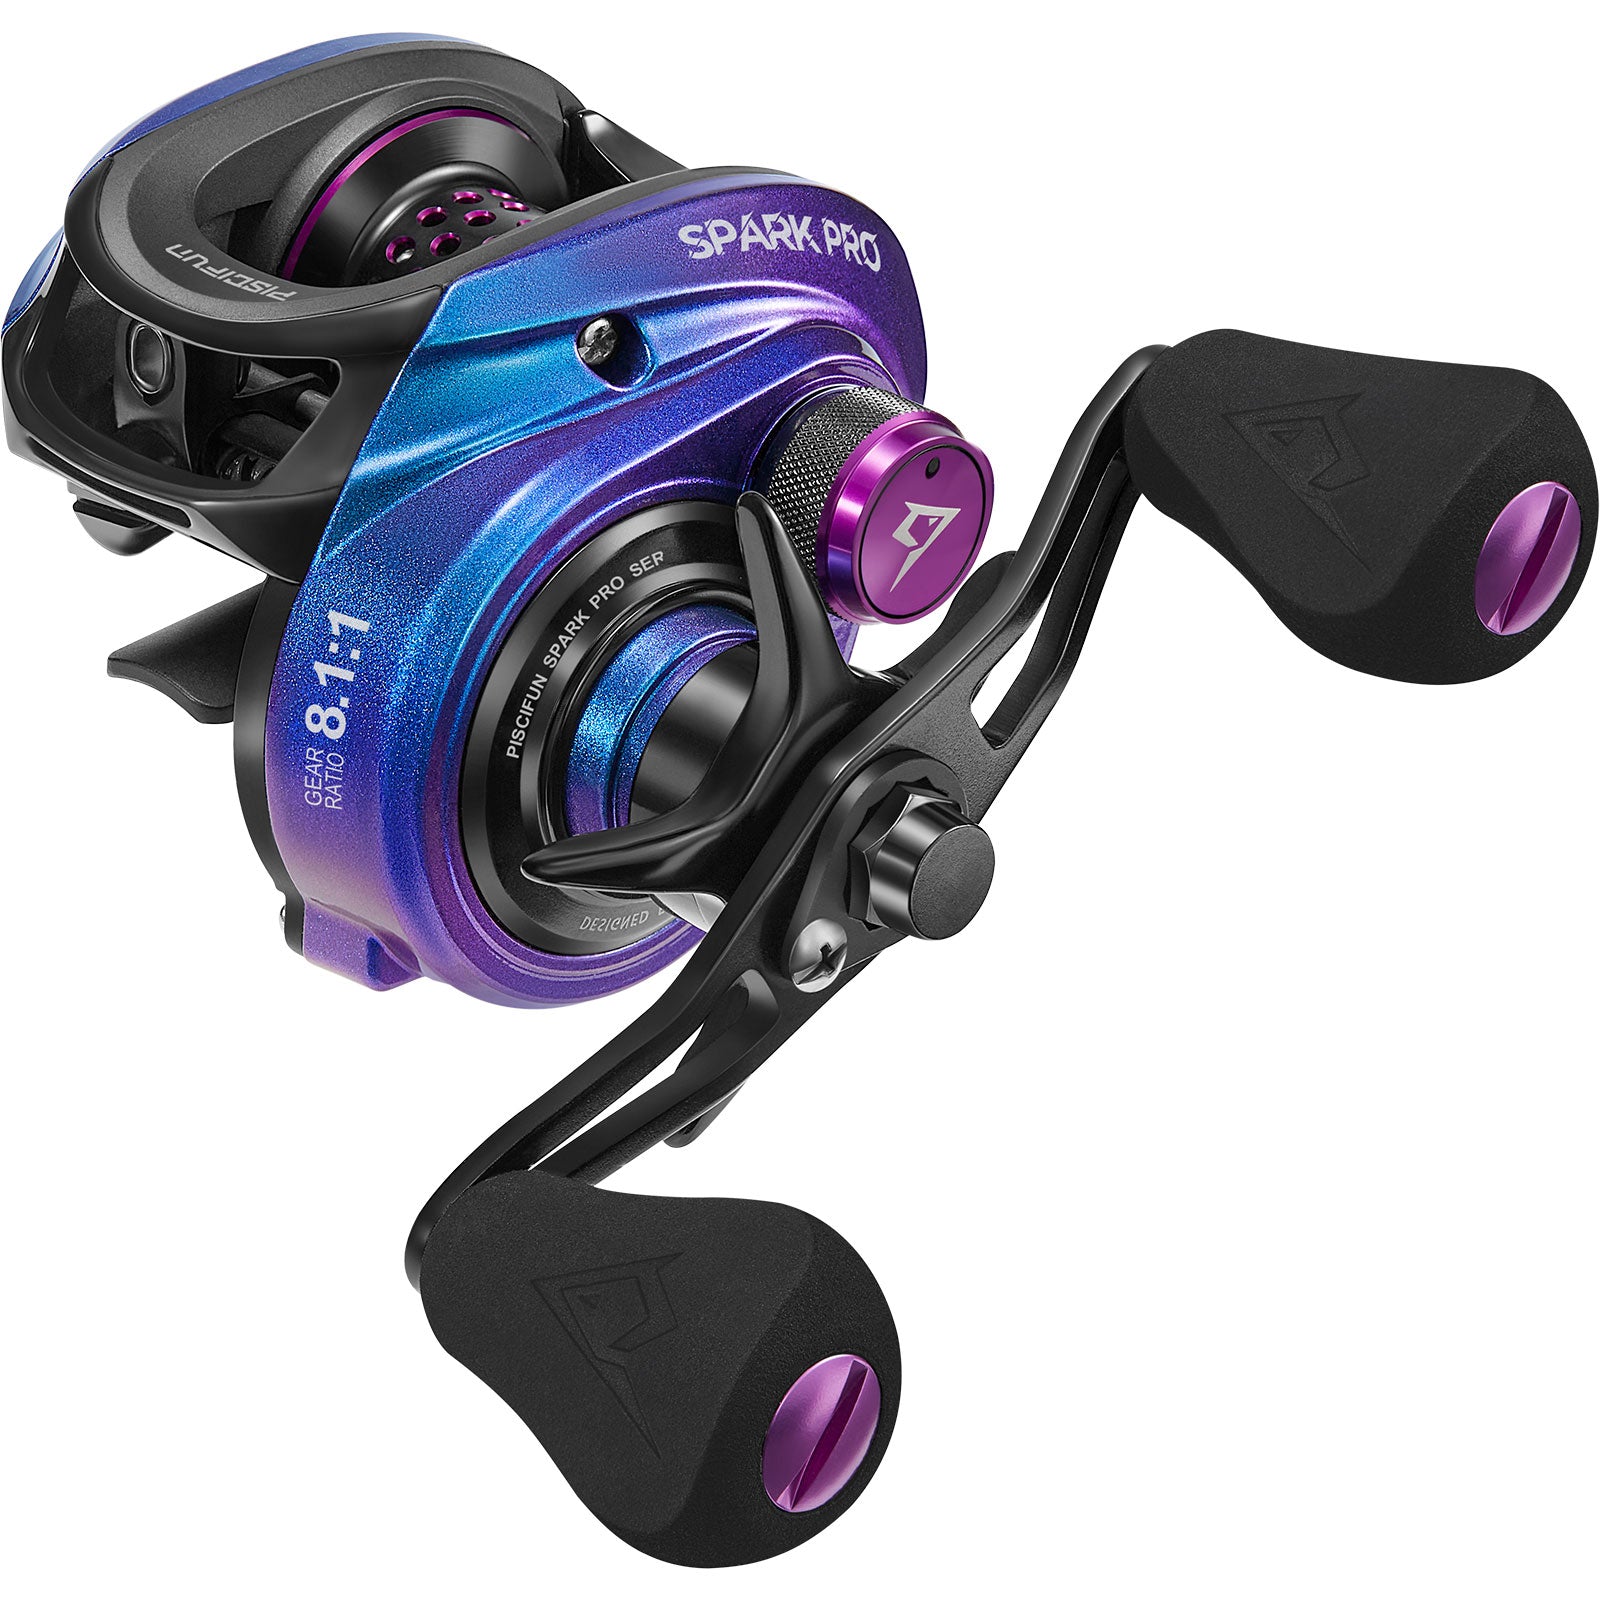 Spark Pro Colorful Baitcaster Fishing Reels, 8.1:1 / Left Hand